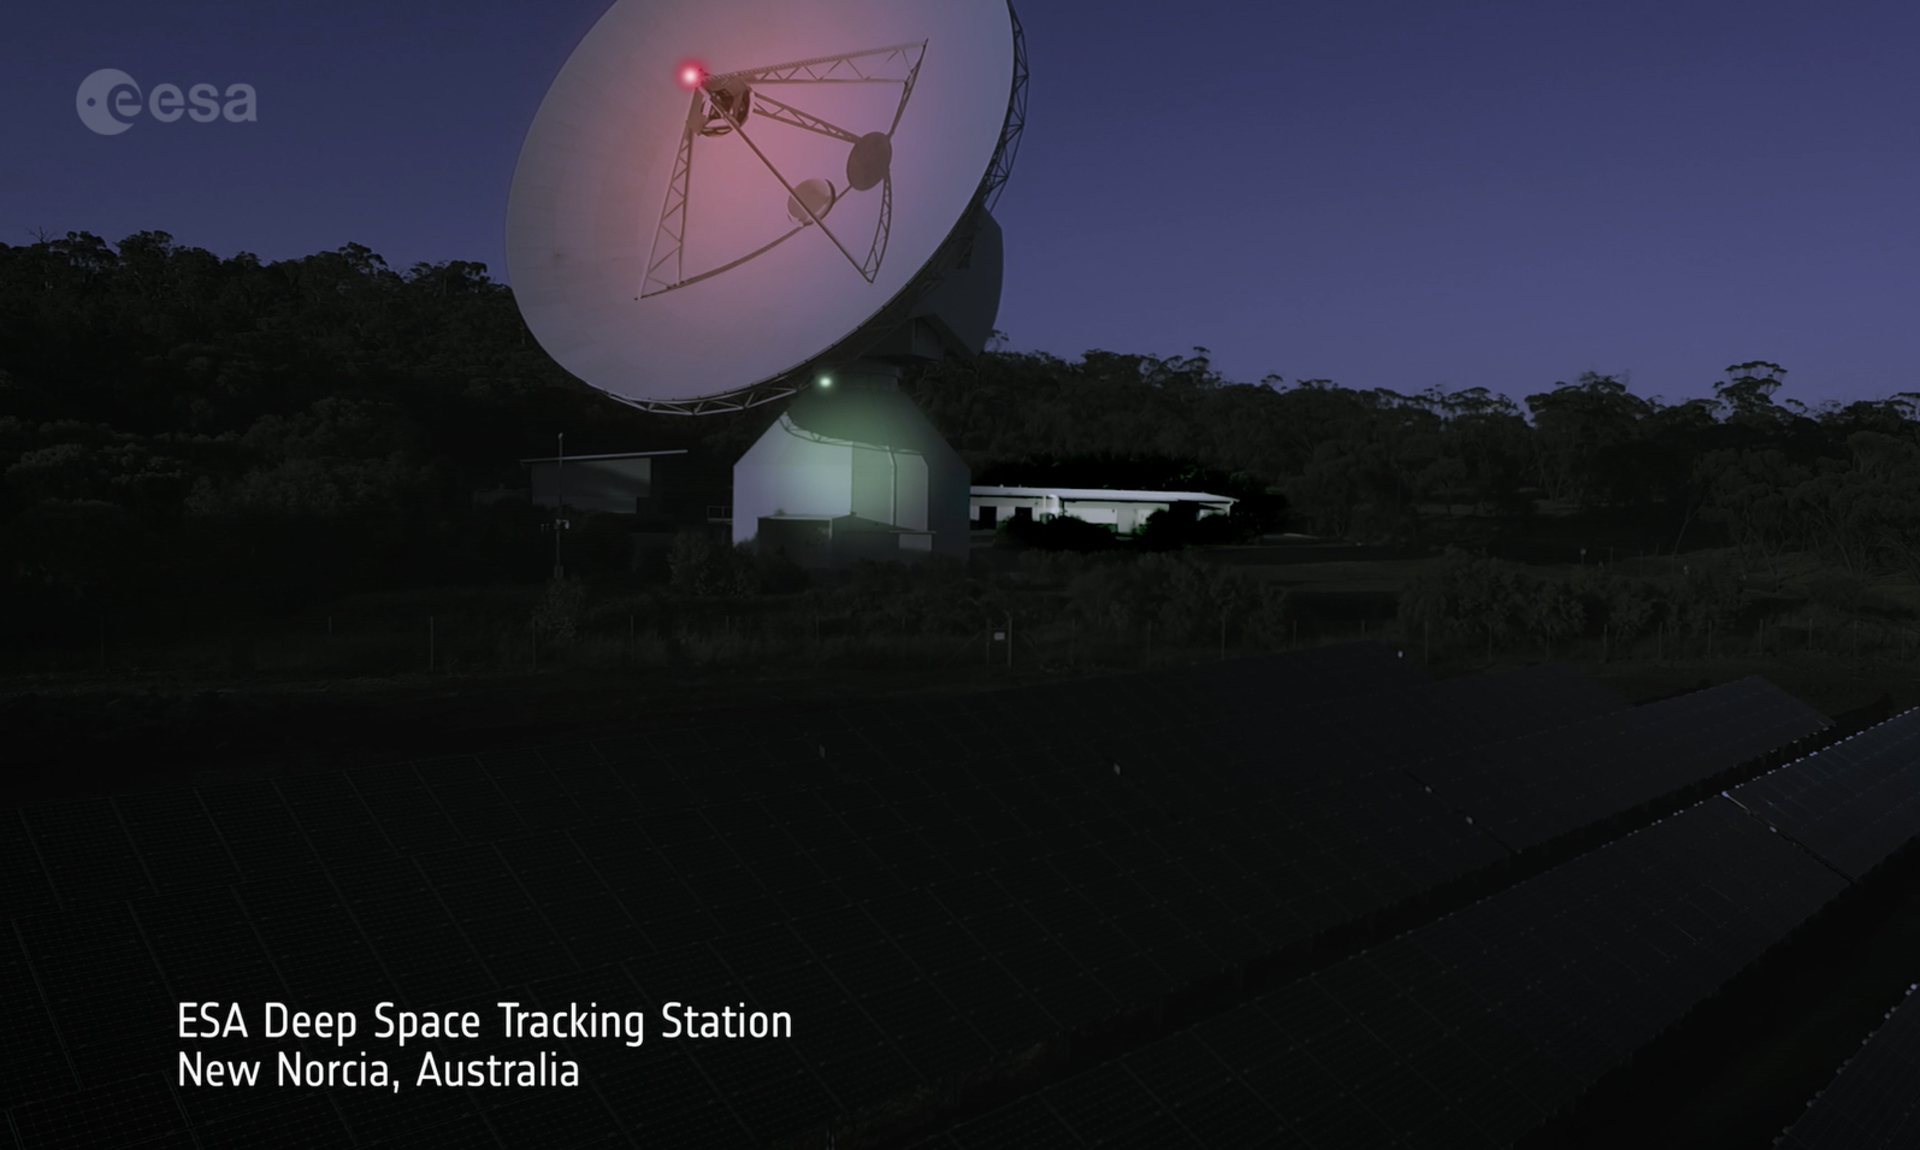 New Norcia Deep Space Tracking Station